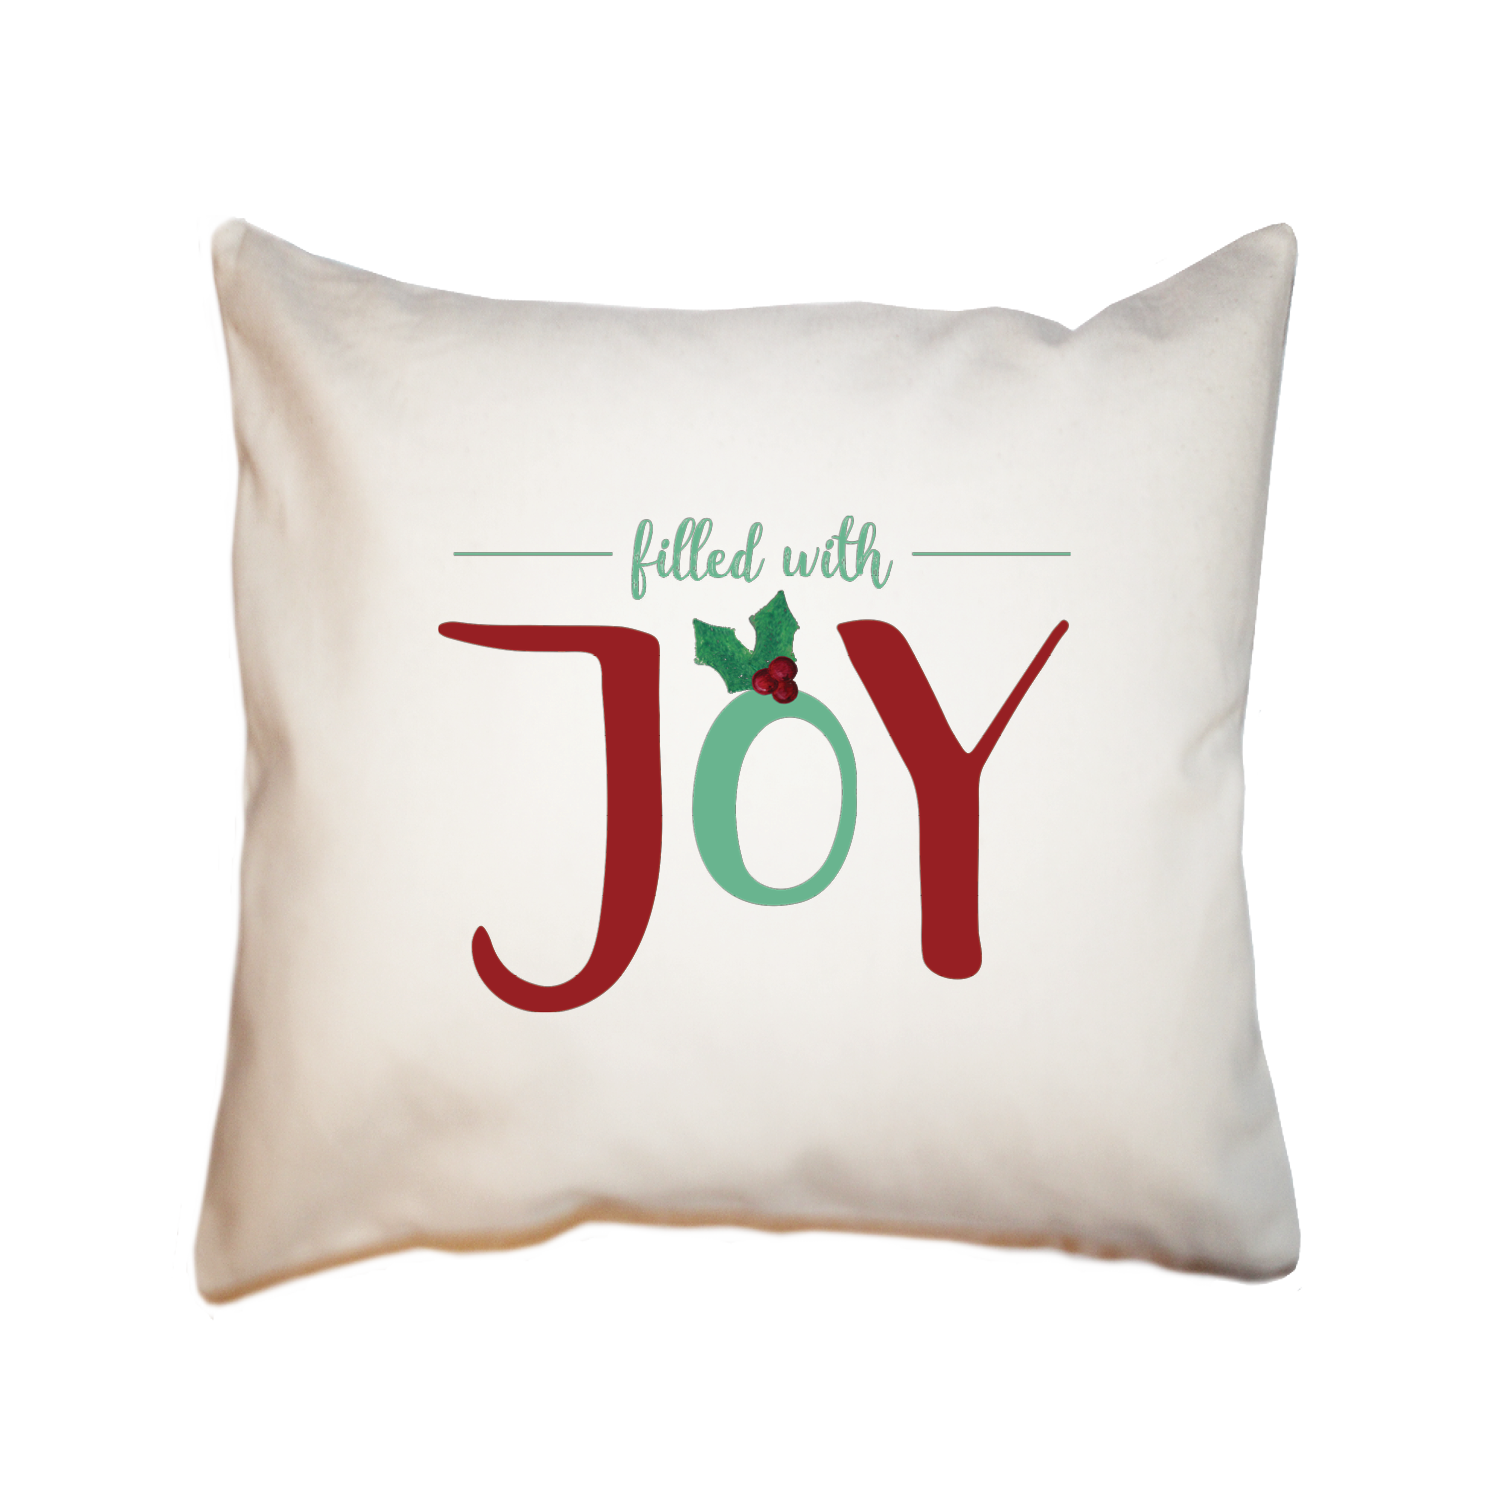 filled with joy square pillow